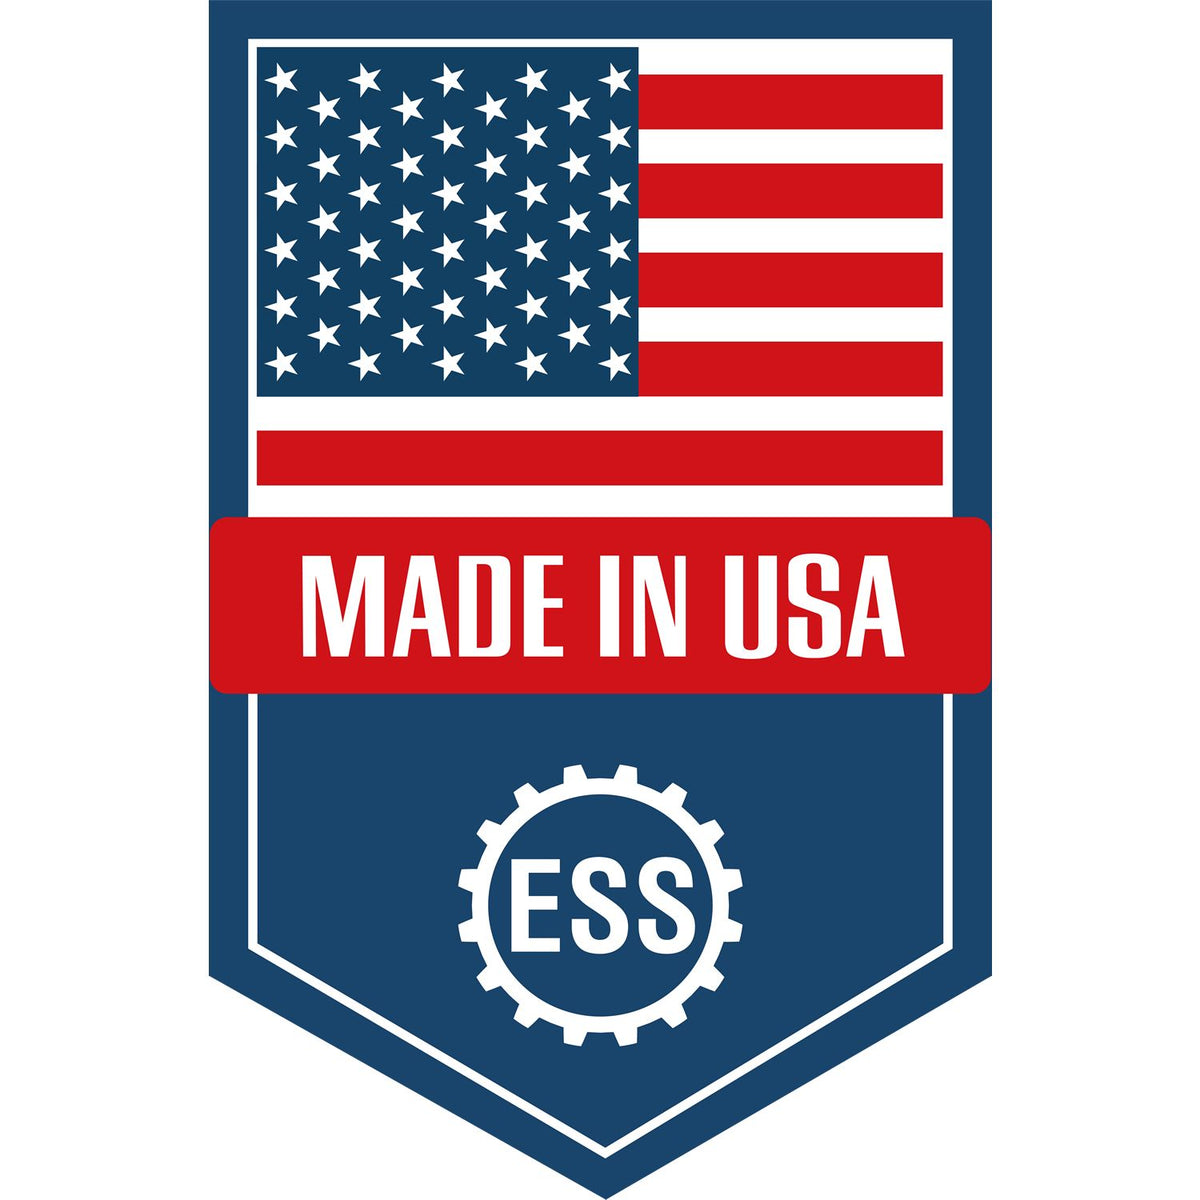 An icon or graphic with an american flag and text reading Made in USA for the Self-Inking Washington Landscape Architect Stamp